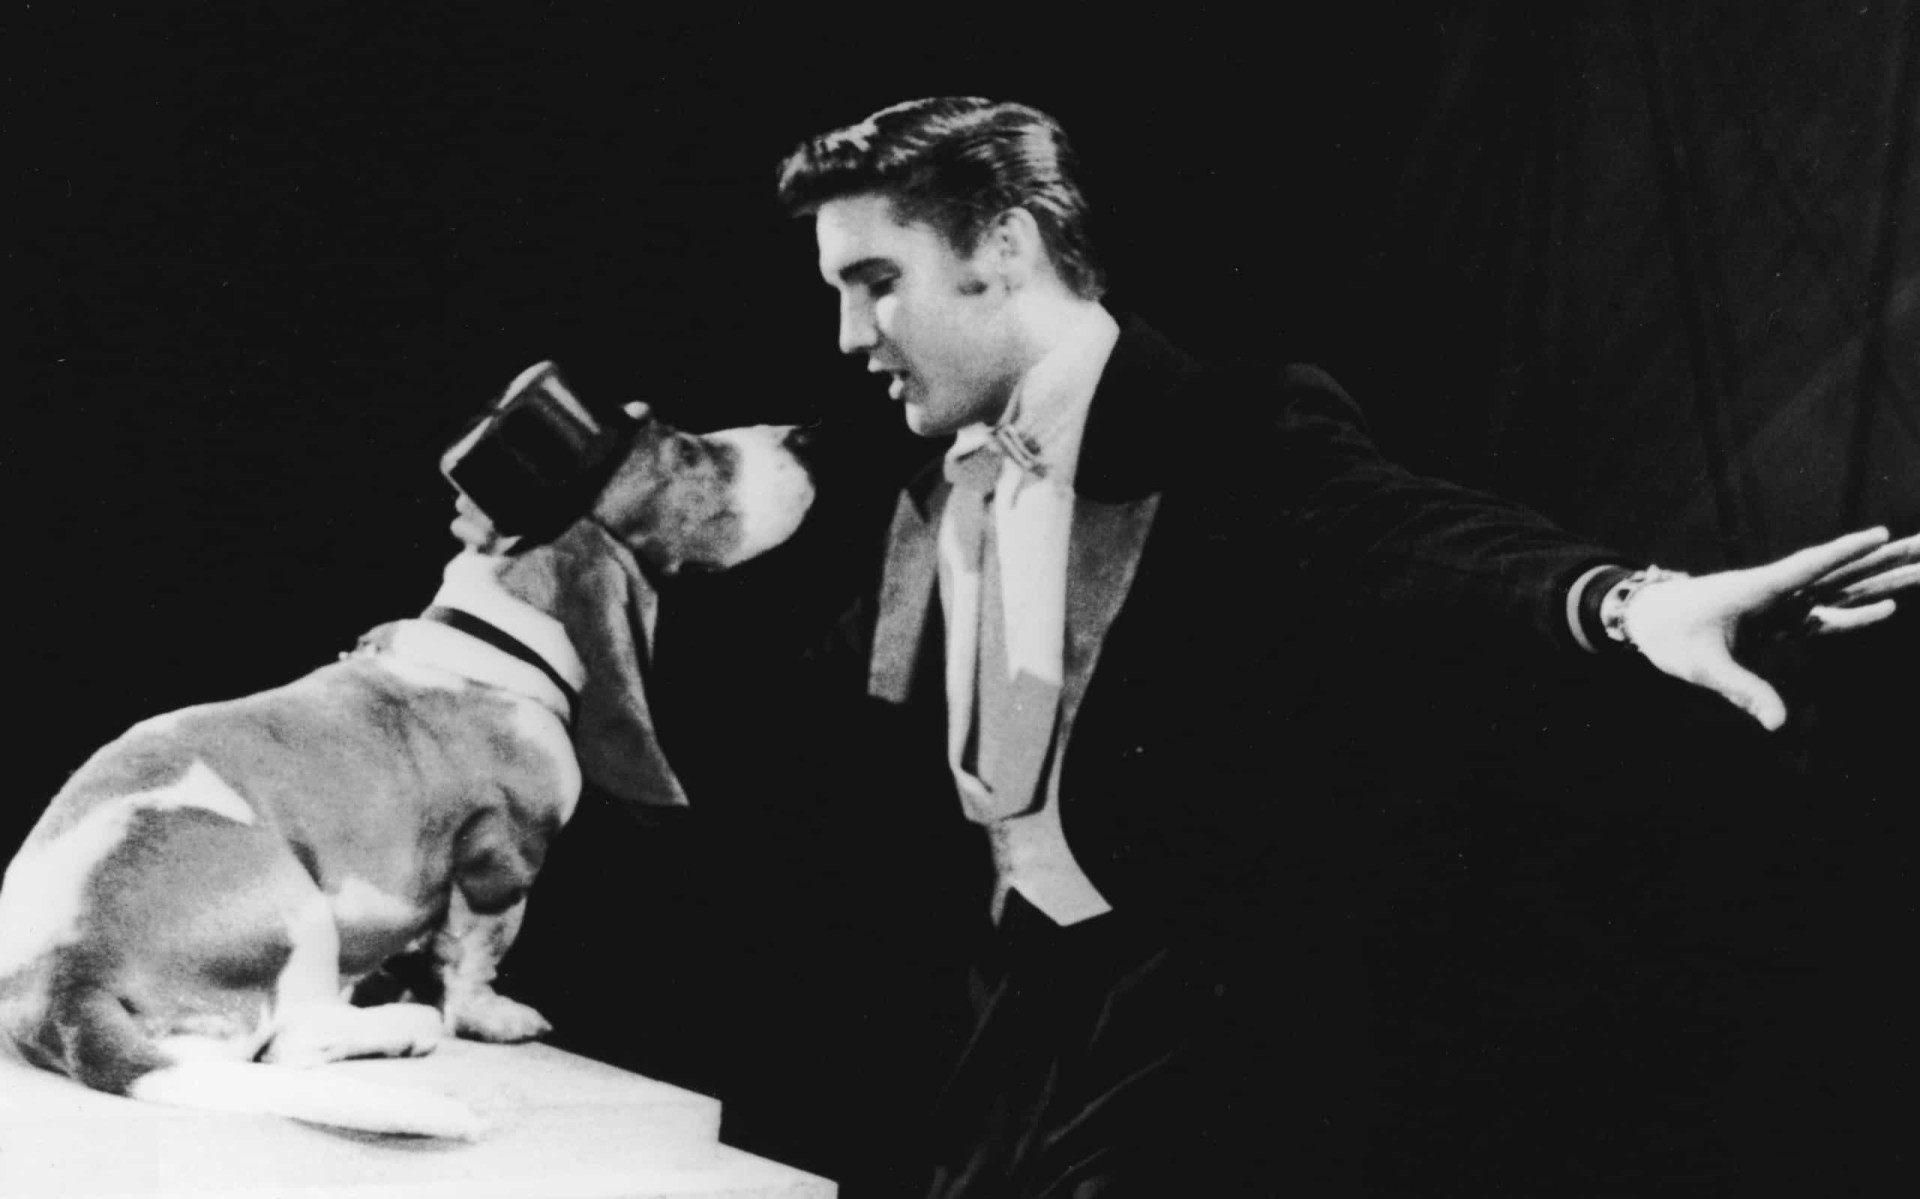 <p>Released in 1956, Elvis Presley's version of 'Hound Dog' was originally recorded in 1953 by R&B singer Big Mama Thornton. To promote his effort, Presley actually sang to an amazingly obedient top hat-wearing Basset Hound on 'The Steve Allen Show.'</p><p>You may also like:<a href="https://www.starsinsider.com/n/183989?utm_source=msn.com&utm_medium=display&utm_campaign=referral_description&utm_content=603256en-my"> Crazy facts about luxury cars </a></p>